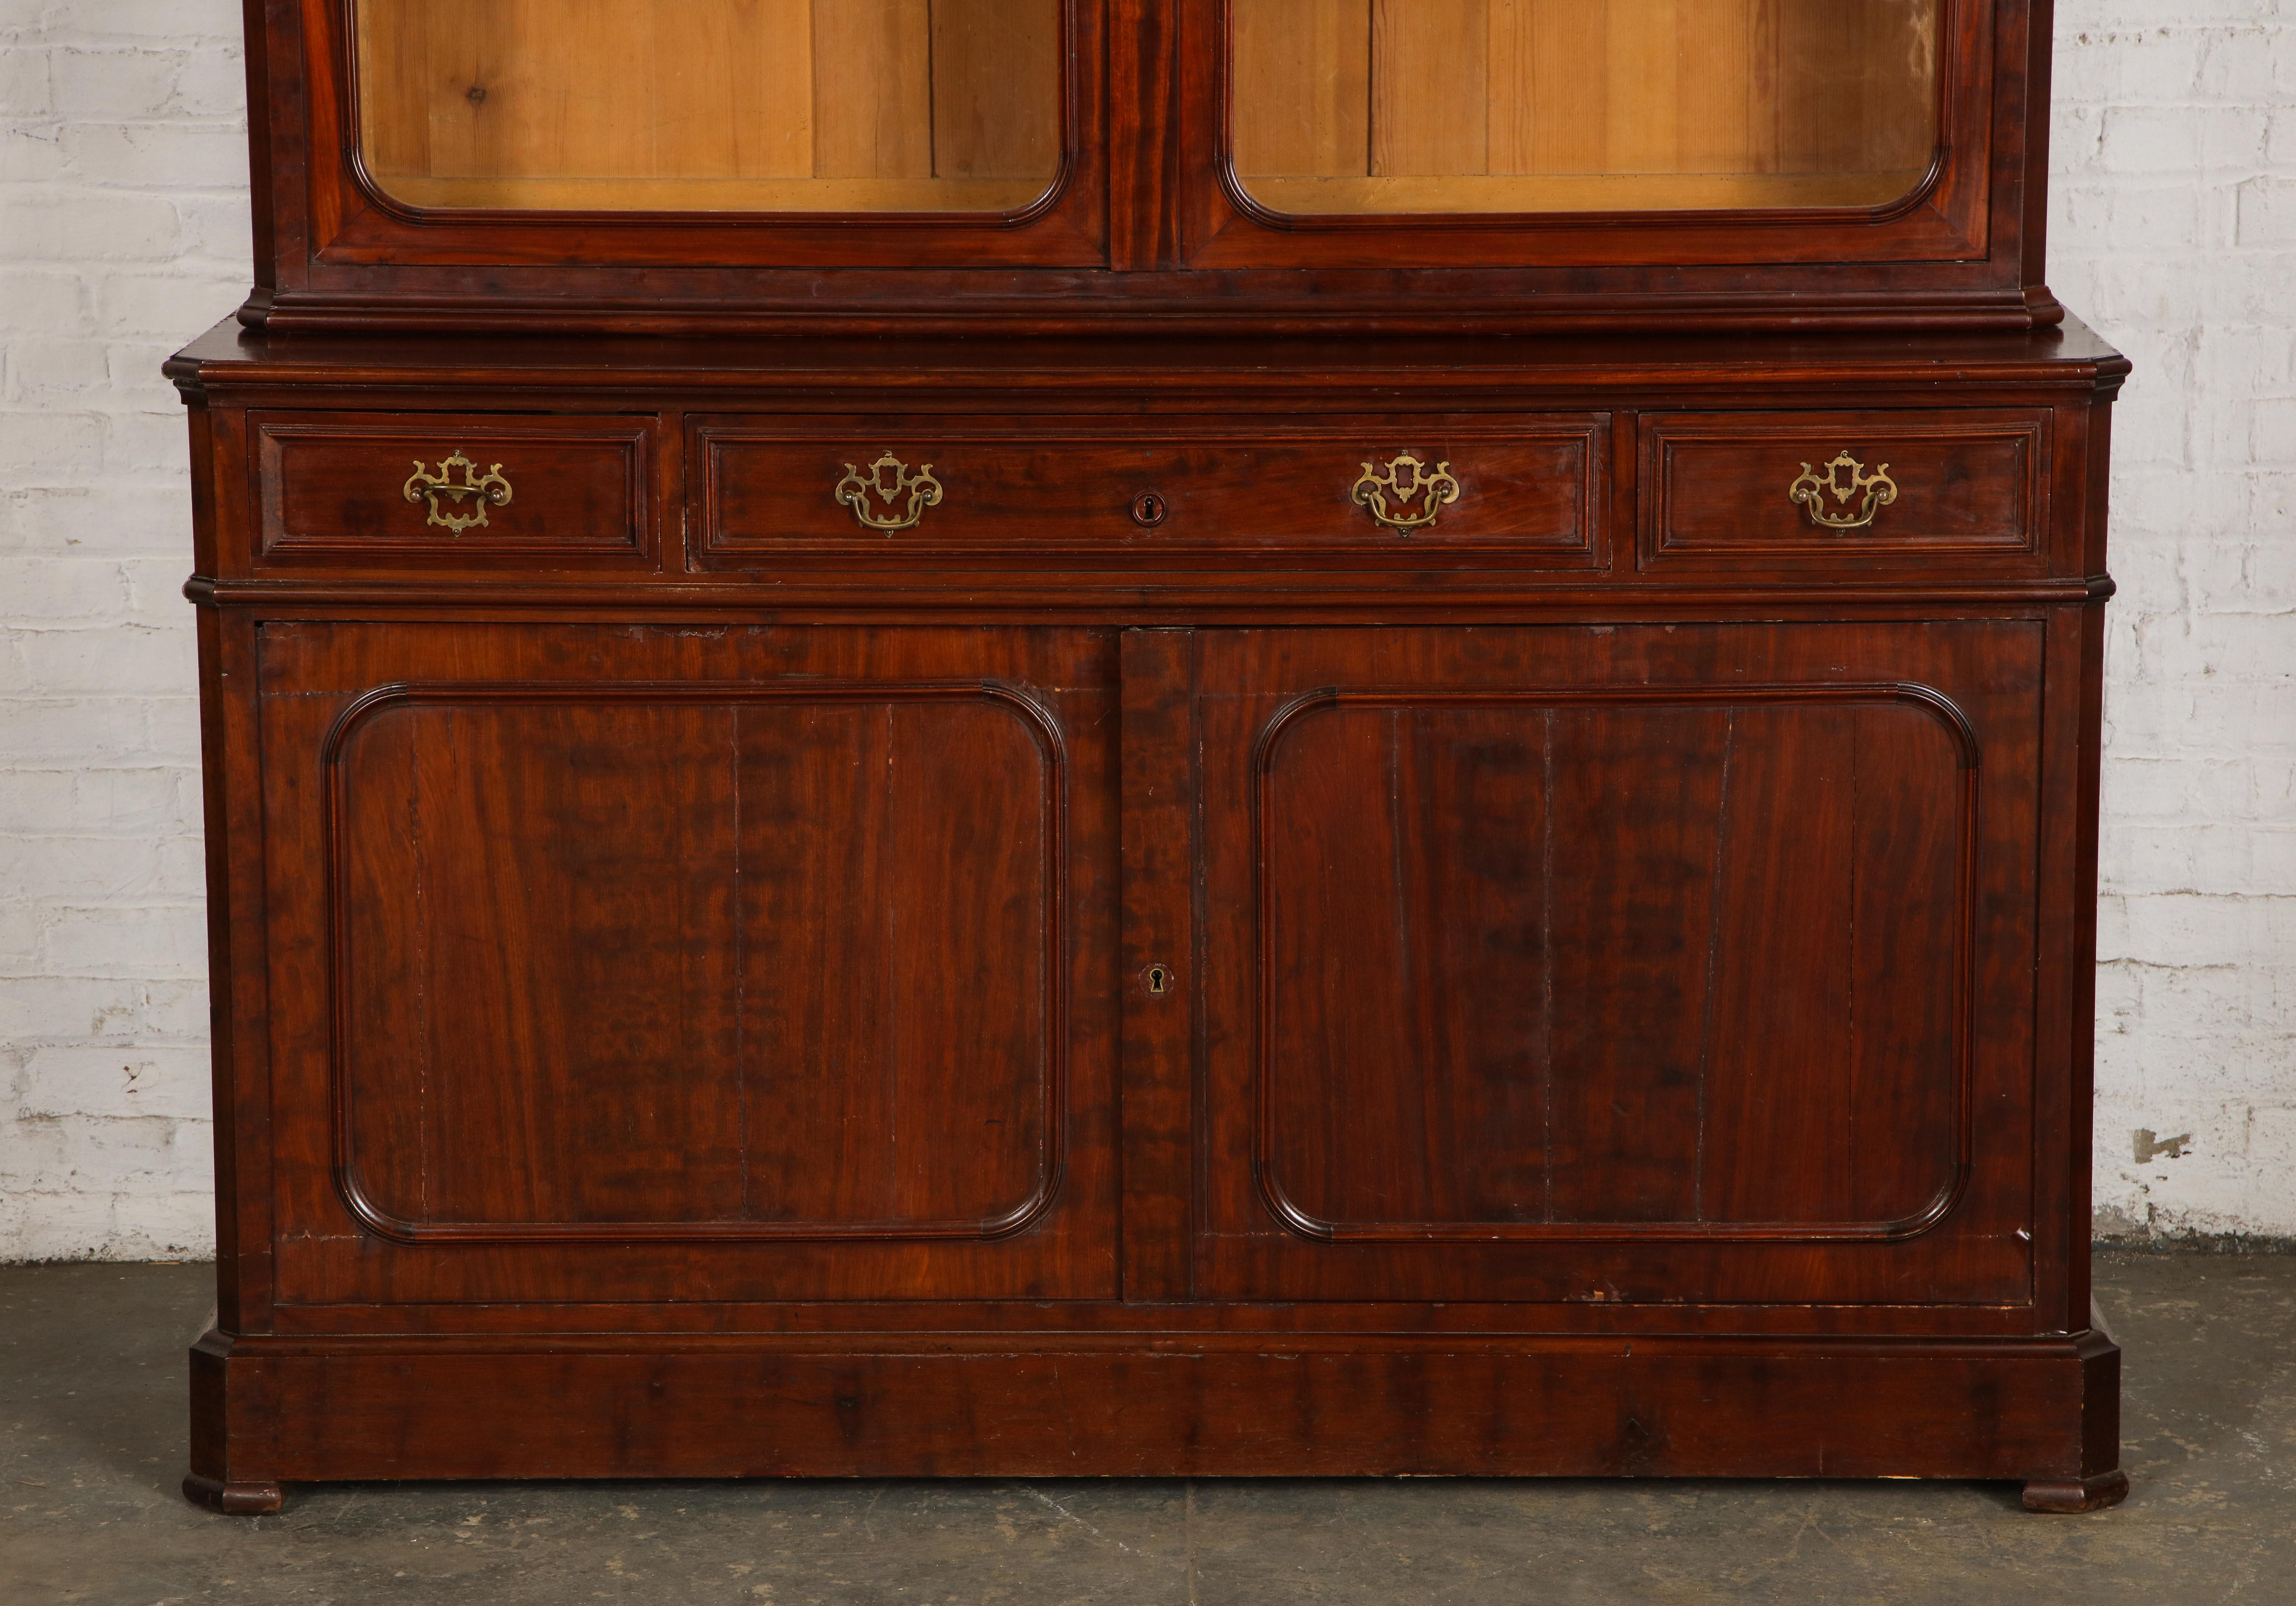 British Pair of William IV Mahogany Glass-Front Bookcases of Large Scale